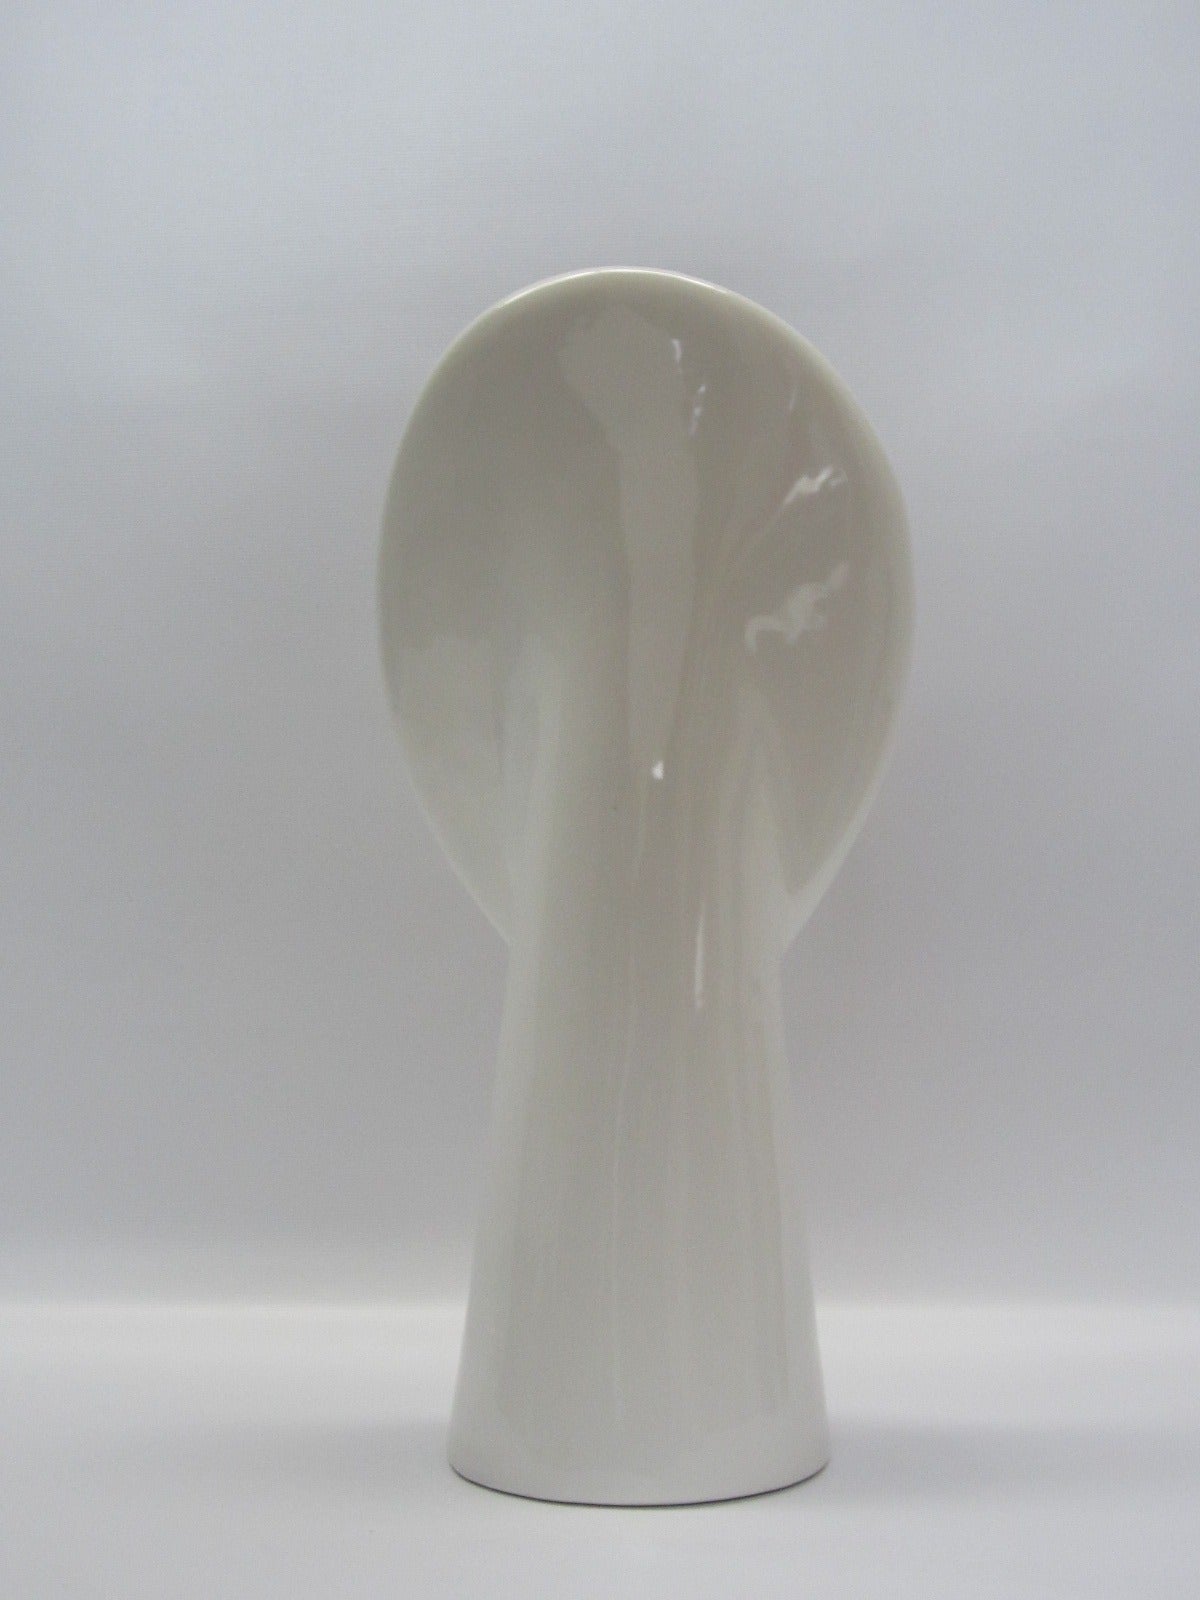 Porcelain Ear Vase by Raymor In Excellent Condition For Sale In Miami, FL